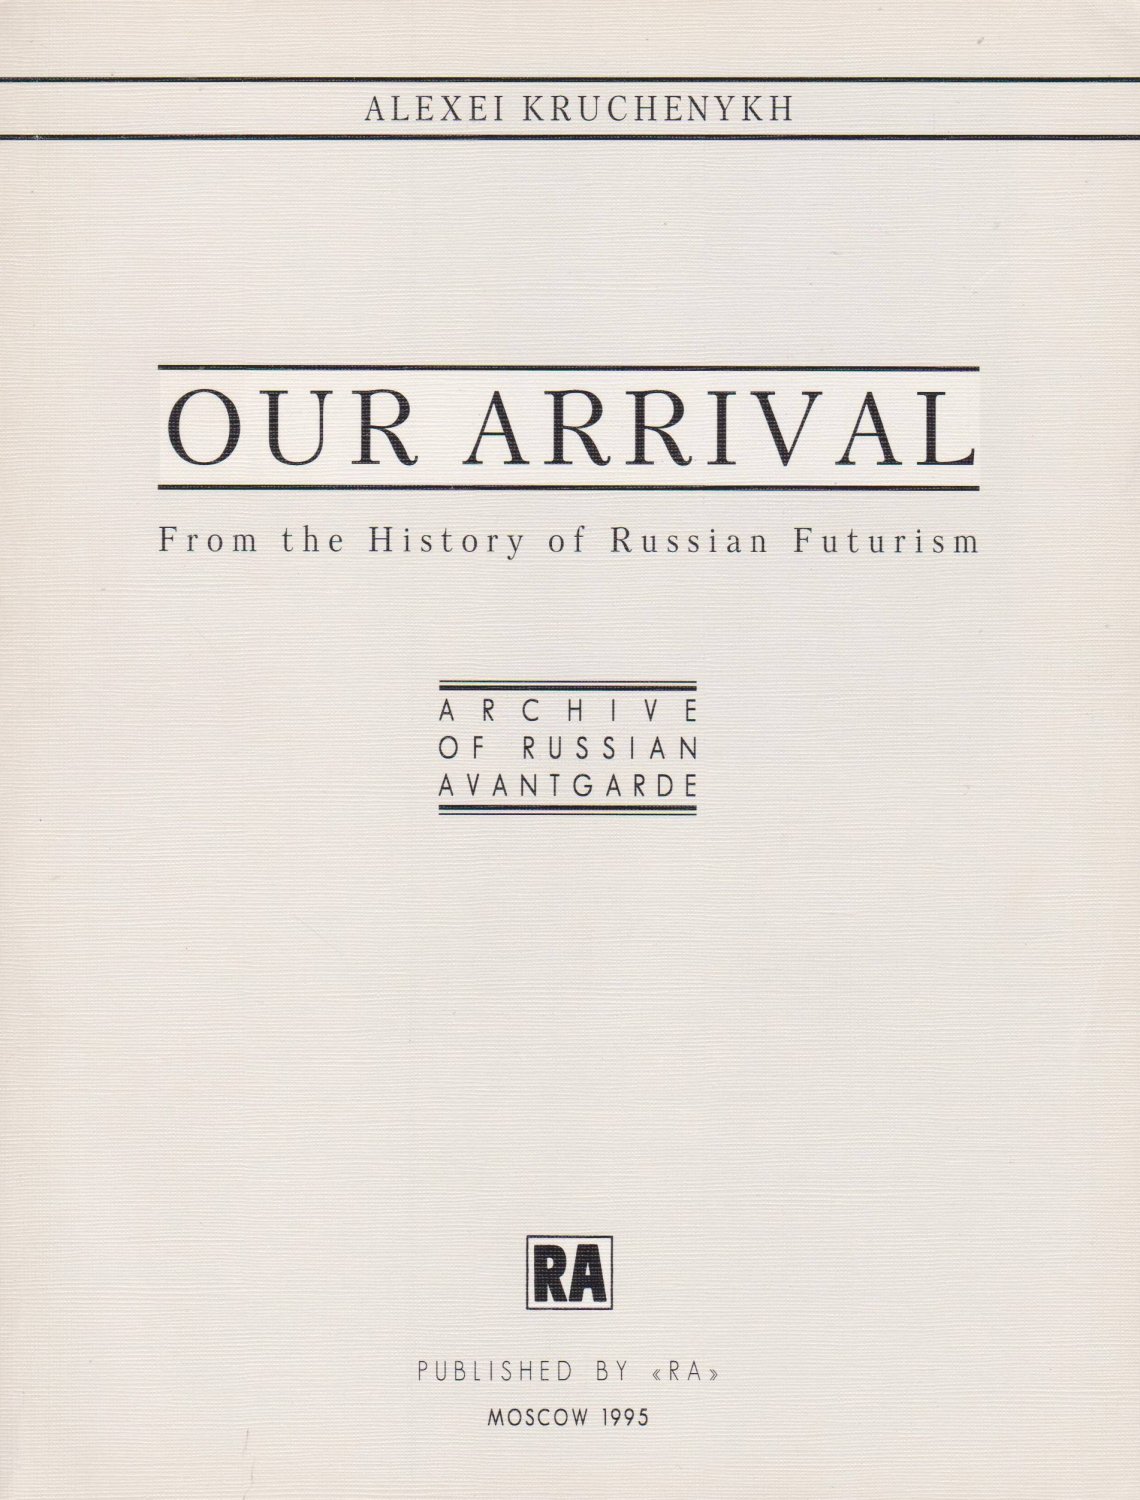 KRUCHENYKH, Alexei:  Our Arrival. From the History of Russian Futurism. 